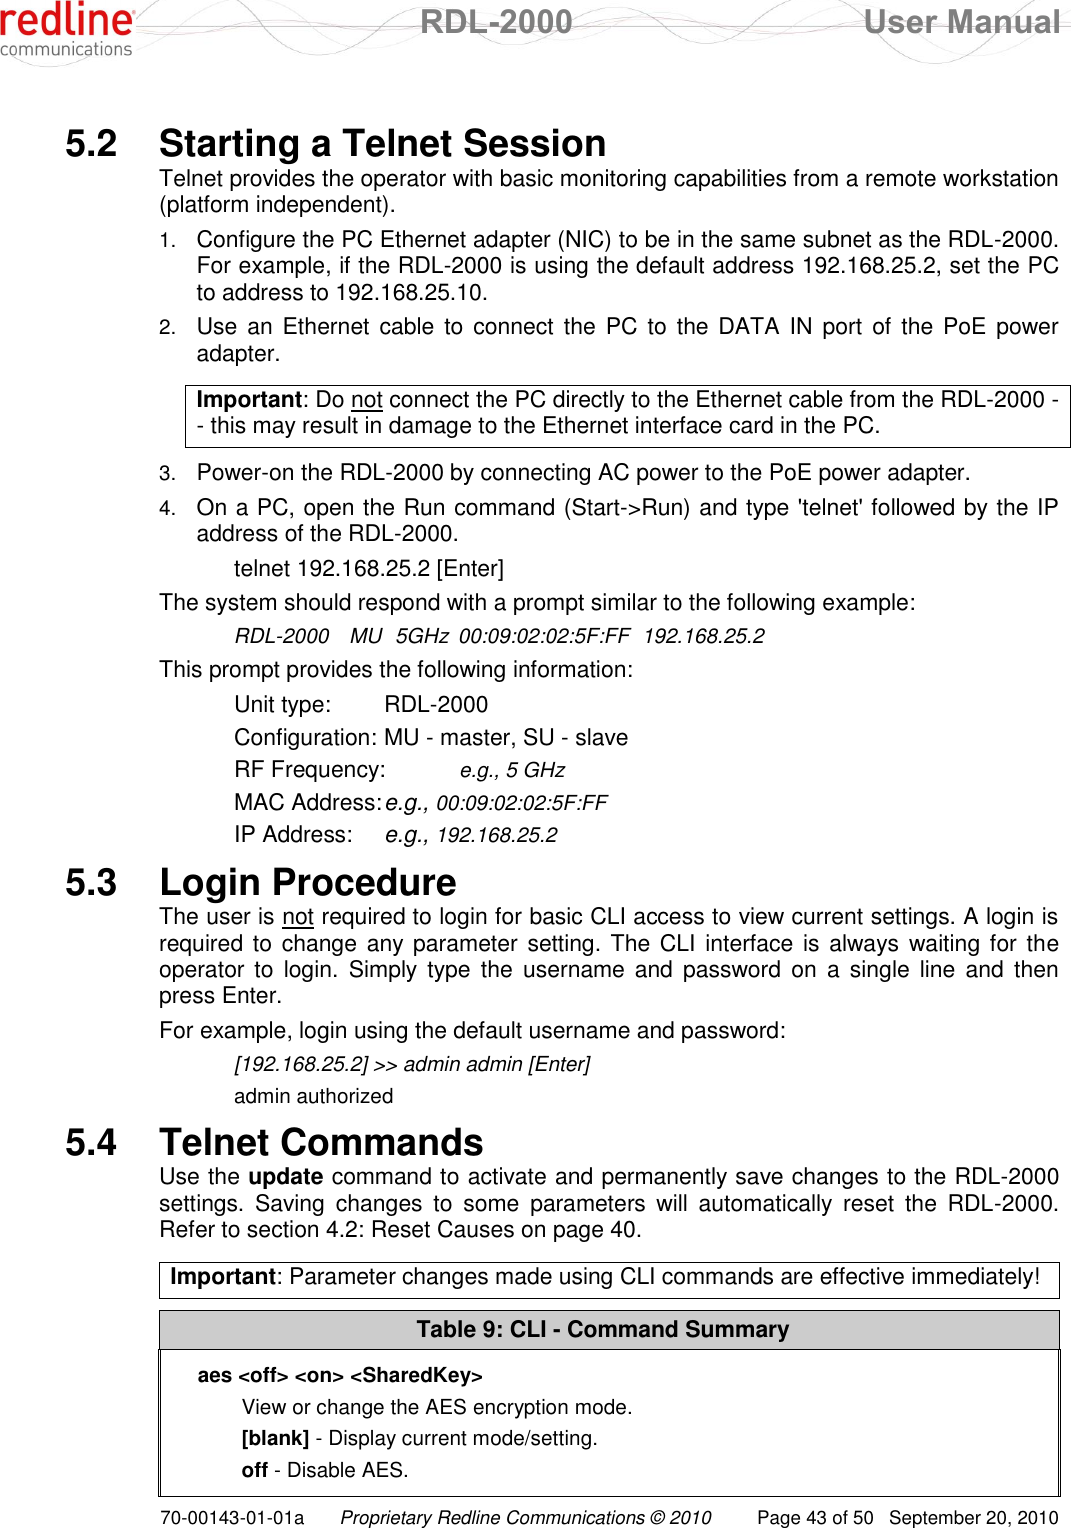  RDL-2000  User Manual 70-00143-01-01a Proprietary Redline Communications © 2010  Page 43 of 50  September 20, 2010  5.2  Starting a Telnet Session Telnet provides the operator with basic monitoring capabilities from a remote workstation (platform independent). 1. Configure the PC Ethernet adapter (NIC) to be in the same subnet as the RDL-2000. For example, if the RDL-2000 is using the default address 192.168.25.2, set the PC to address to 192.168.25.10. 2. Use an Ethernet  cable to connect  the  PC to the DATA  IN  port  of the PoE  power adapter.  Important: Do not connect the PC directly to the Ethernet cable from the RDL-2000 -- this may result in damage to the Ethernet interface card in the PC.  3. Power-on the RDL-2000 by connecting AC power to the PoE power adapter. 4. On a PC, open the Run command (Start-&gt;Run) and type &apos;telnet&apos; followed by the IP address of the RDL-2000.    telnet 192.168.25.2 [Enter] The system should respond with a prompt similar to the following example:  RDL-2000  MU  5GHz  00:09:02:02:5F:FF  192.168.25.2 This prompt provides the following information: Unit type:  RDL-2000 Configuration: MU - master, SU - slave RF Frequency:  e.g., 5 GHz MAC Address: e.g., 00:09:02:02:5F:FF IP Address:  e.g., 192.168.25.2 5.3  Login Procedure The user is not required to login for basic CLI access to view current settings. A login is required to  change any parameter  setting. The CLI  interface is always waiting for the operator to  login.  Simply type  the  username  and password  on  a single  line  and  then press Enter.  For example, login using the default username and password:   [192.168.25.2] &gt;&gt; admin admin [Enter]   admin authorized 5.4  Telnet Commands Use the update command to activate and permanently save changes to the RDL-2000 settings.  Saving  changes  to  some  parameters  will  automatically  reset  the  RDL-2000. Refer to section 4.2: Reset Causes on page 40.  Important: Parameter changes made using CLI commands are effective immediately!  Table 9: CLI - Command Summary aes &lt;off&gt; &lt;on&gt; &lt;SharedKey&gt; View or change the AES encryption mode. [blank] - Display current mode/setting. off - Disable AES. 